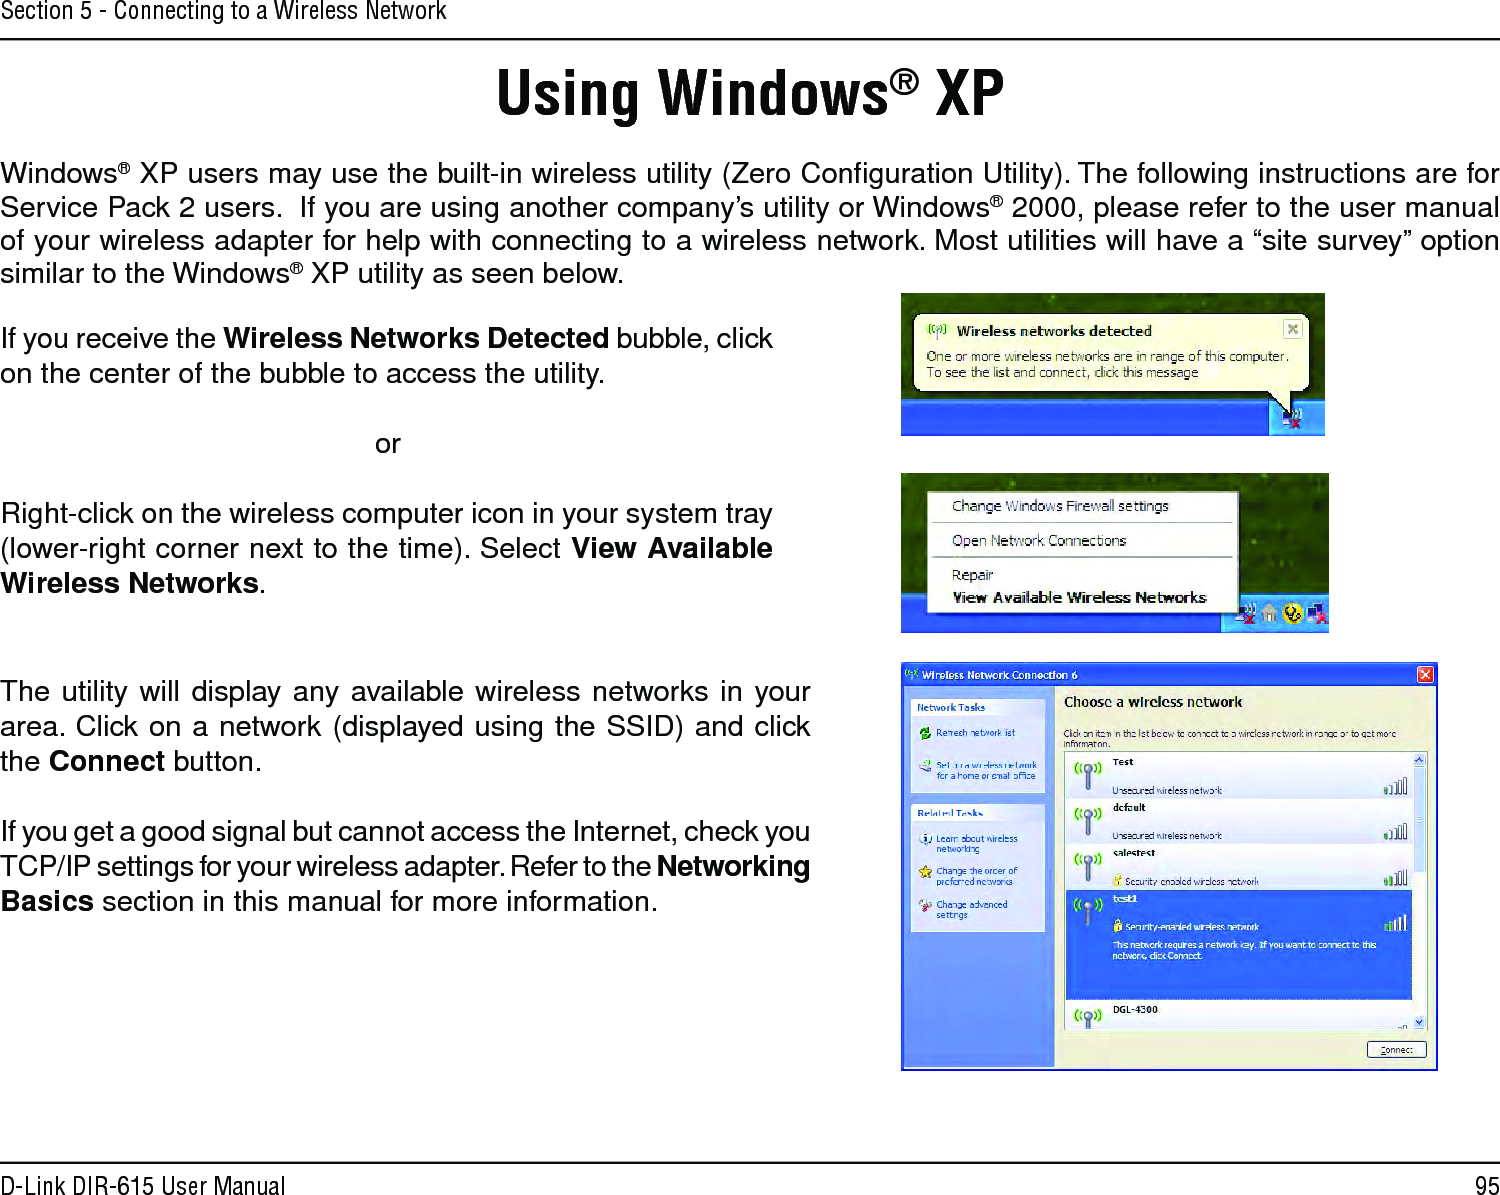 95D-Link DIR-615 User ManualSection 5 - Connecting to a Wireless NetworkUsing Windows® XPWindows® XP users may use the built-in wireless utility (Zero Conﬁguration Utility). The following instructions are for Service Pack 2 users.  If you are using another company’s utility or Windows® 2000, please refer to the user manual of your wireless adapter for help with connecting to a wireless network. Most utilities will have a “site survey” option similar to the Windows® XP utility as seen below.If you receive the Wireless Networks Detected bubble, click on the center of the bubble to access the utility.     orRight-click on the wireless computer icon in your system tray (lower-right corner next to the time). Select View Available Wireless Networks.The utility will display any available wireless networks in your area. Click on a network (displayed using the SSID) and click the Connect button.If you get a good signal but cannot access the Internet, check you TCP/IP settings for your wireless adapter. Refer to the Networking Basics section in this manual for more information.